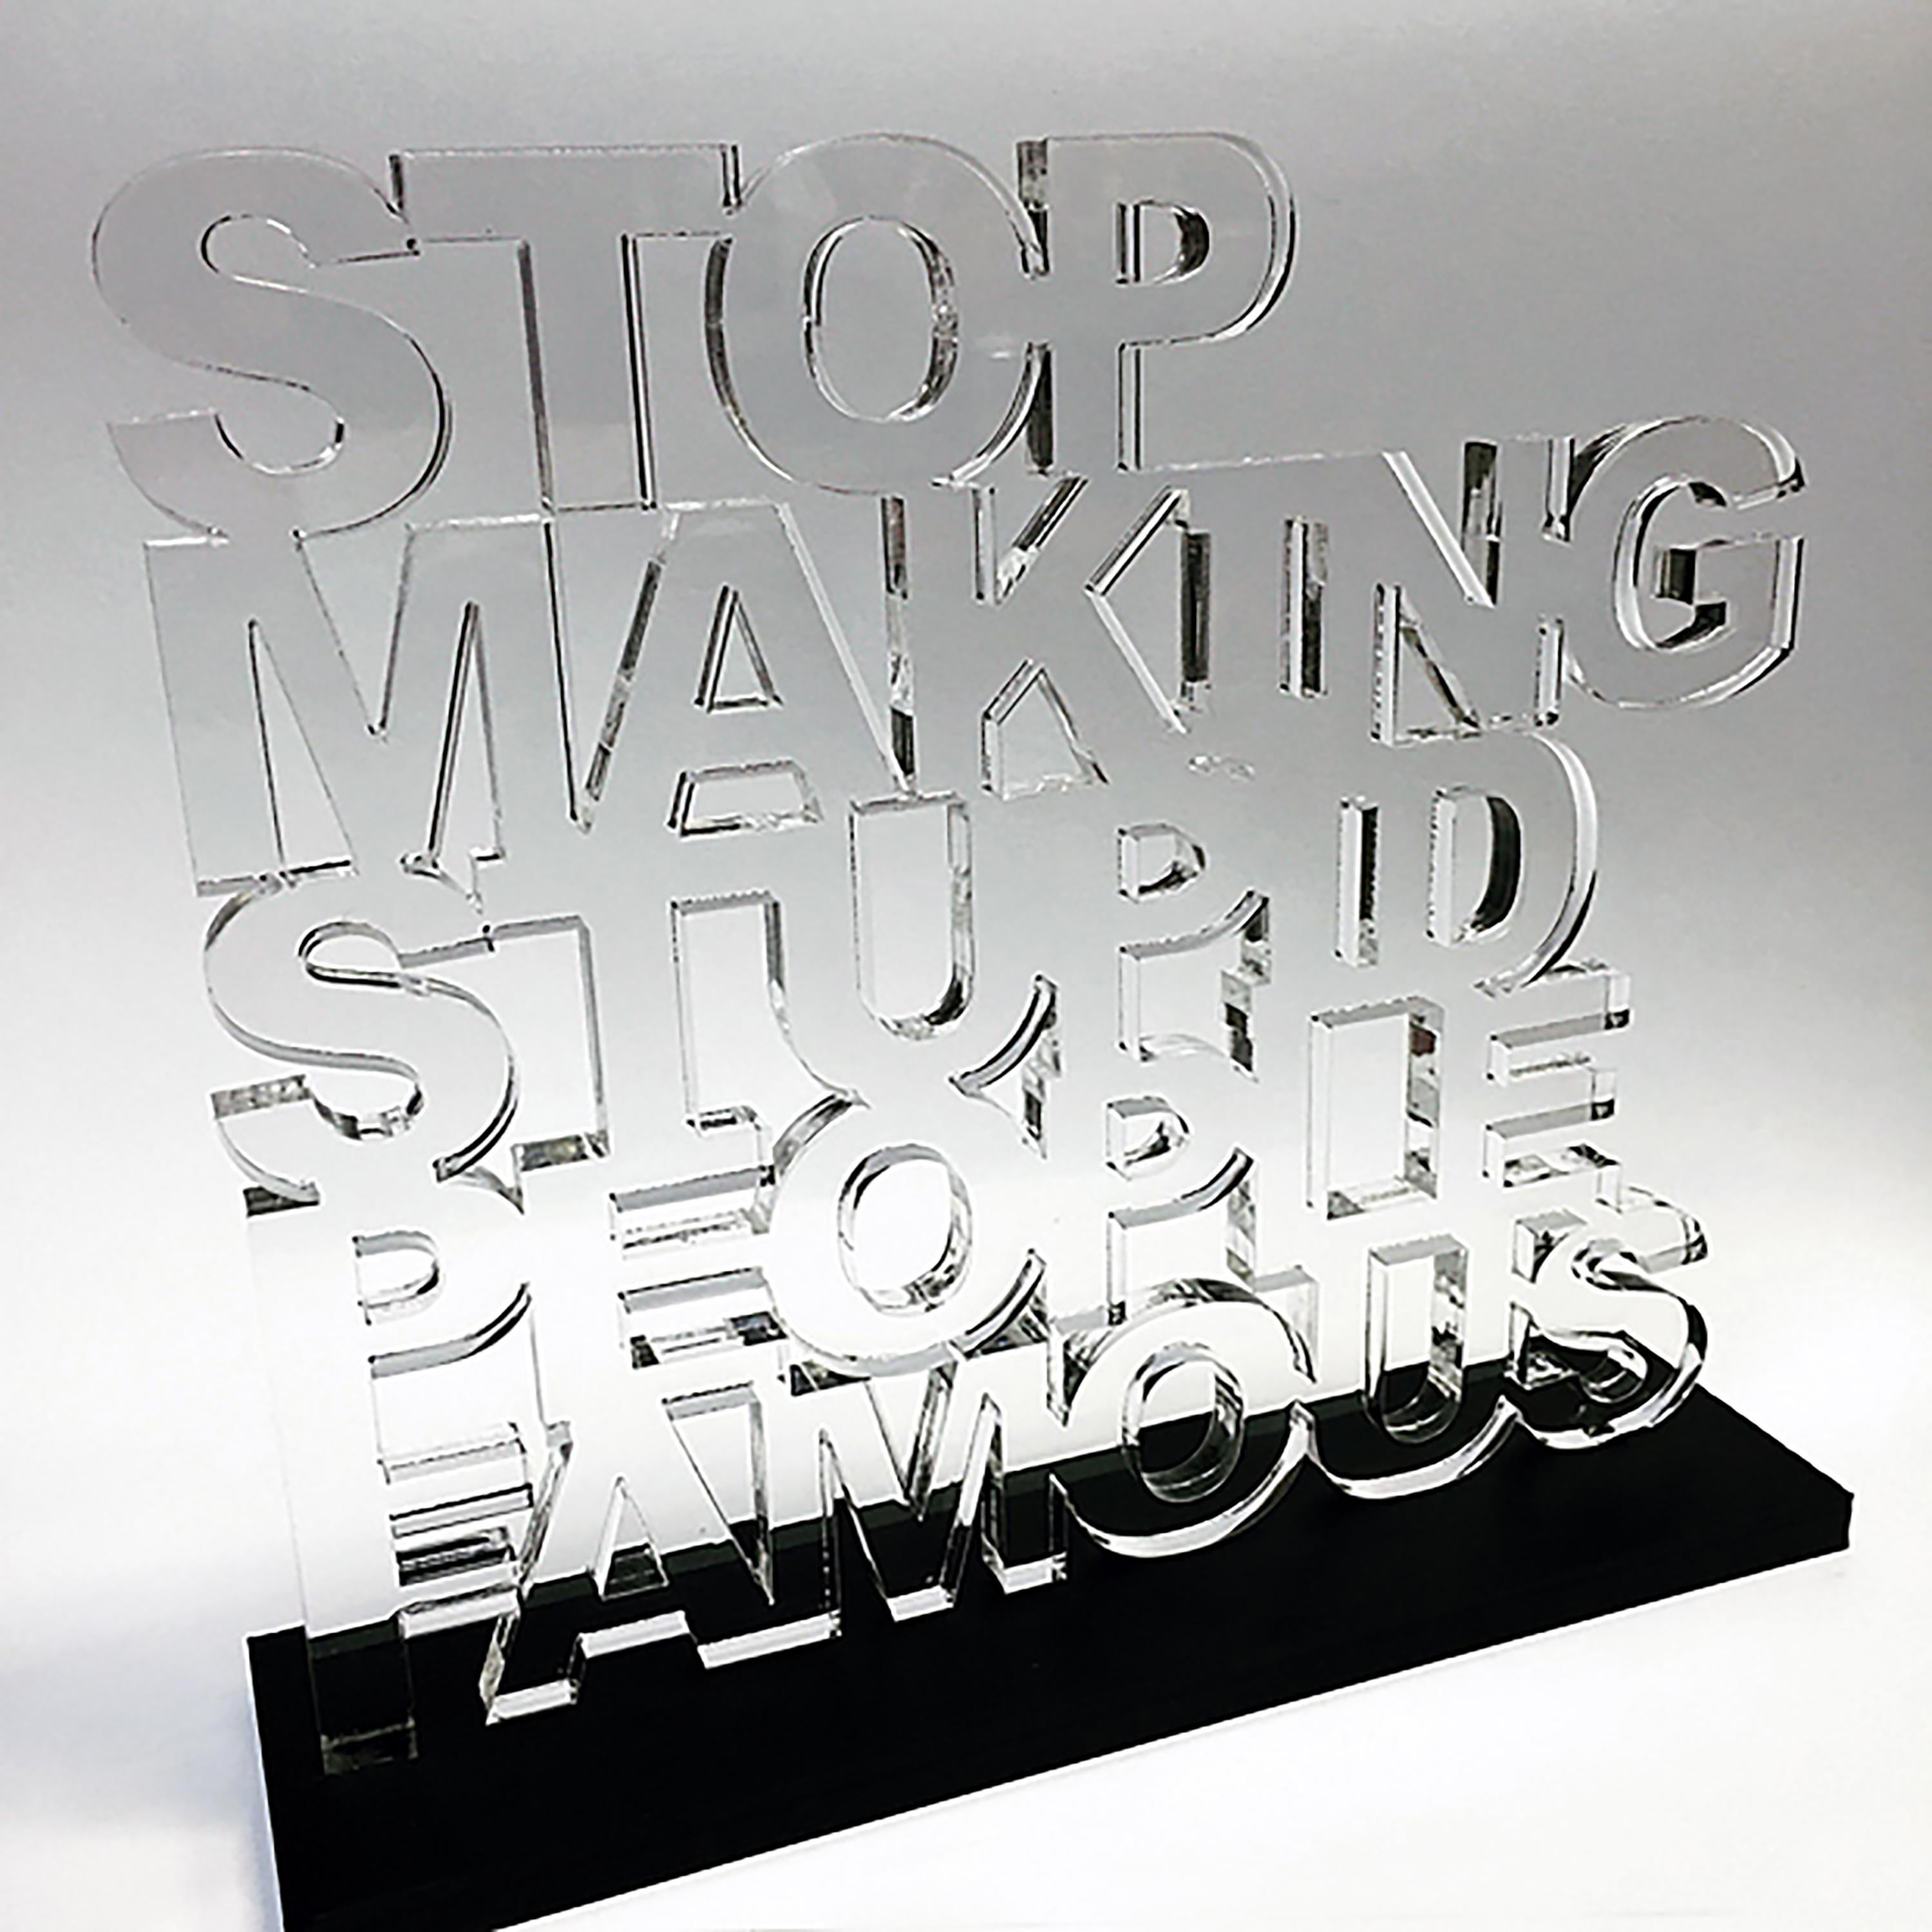 Plastic Jesus Figurative Sculpture - "Stop Making Stupid People Famous" - Clear Acrylic Sculpture with Black Acrylic 